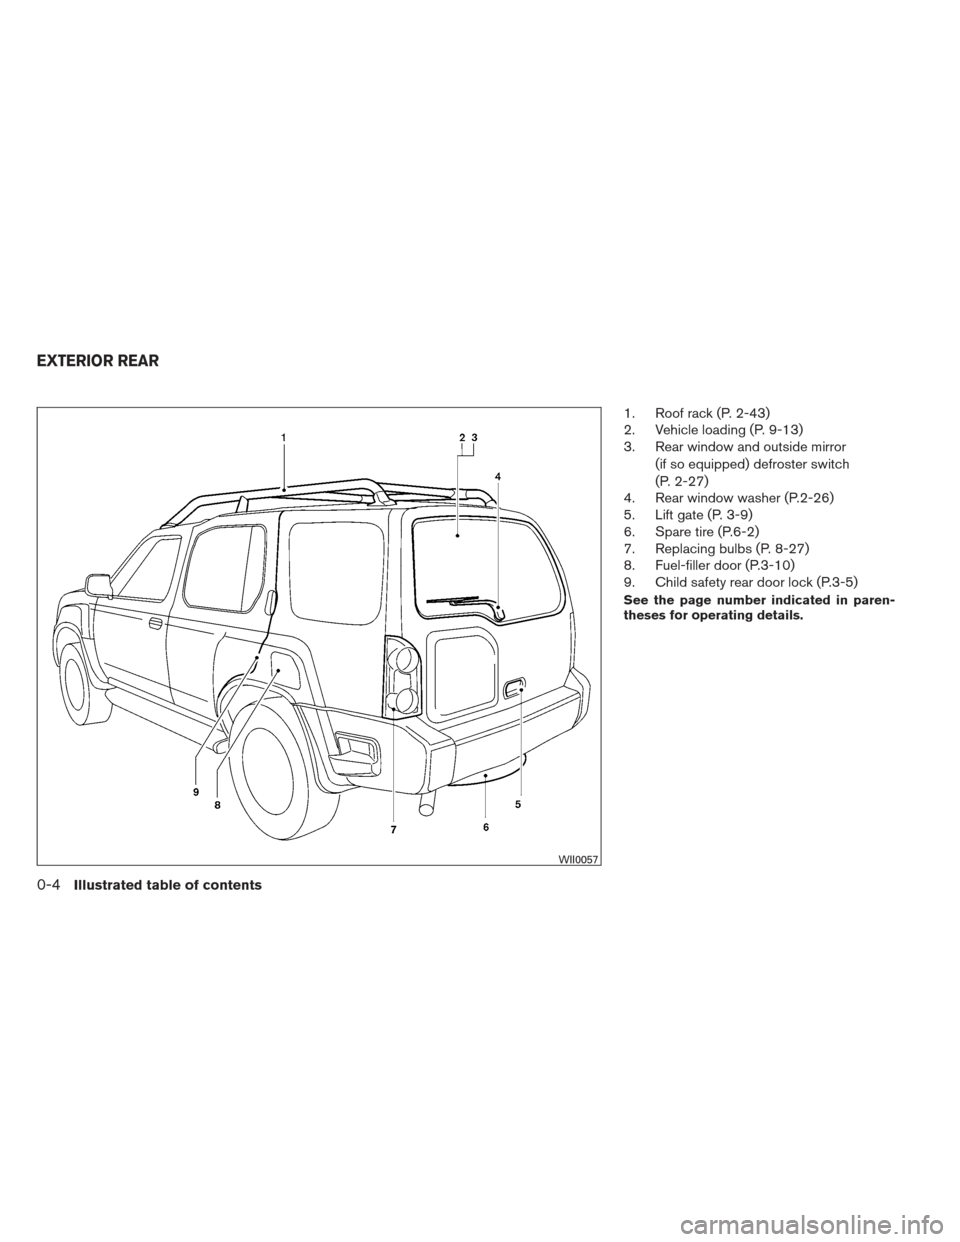 NISSAN XTERRA 2012 N50 / 2.G Owners Manual 1. Roof rack (P. 2-43)
2. Vehicle loading (P. 9-13)
3. Rear window and outside mirror(if so equipped) defroster switch
(P. 2-27)
4. Rear window washer (P.2-26)
5. Lift gate (P. 3-9)
6. Spare tire (P.6